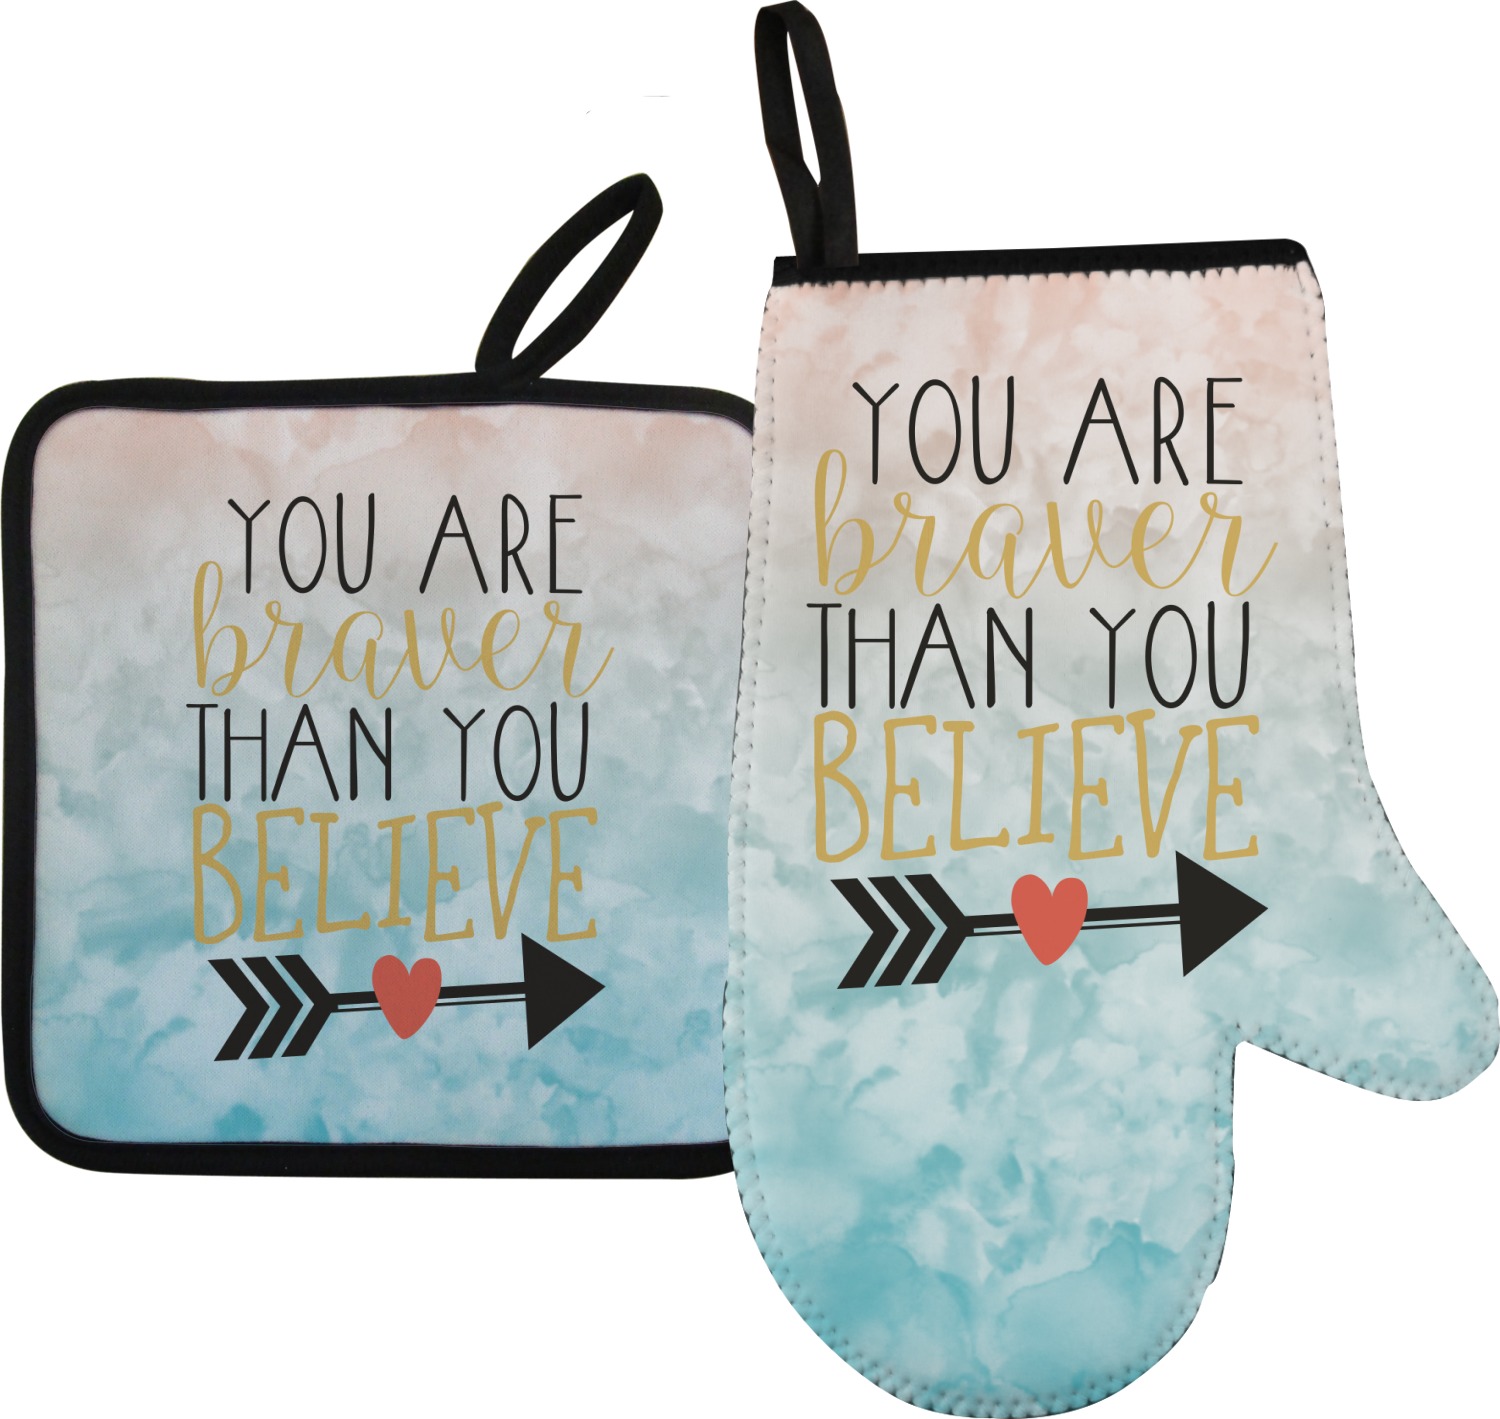 Floral Wreath Mainstream Kitchen Oven Mitt and Potholder 2-Piece Set with Inspirational Quote